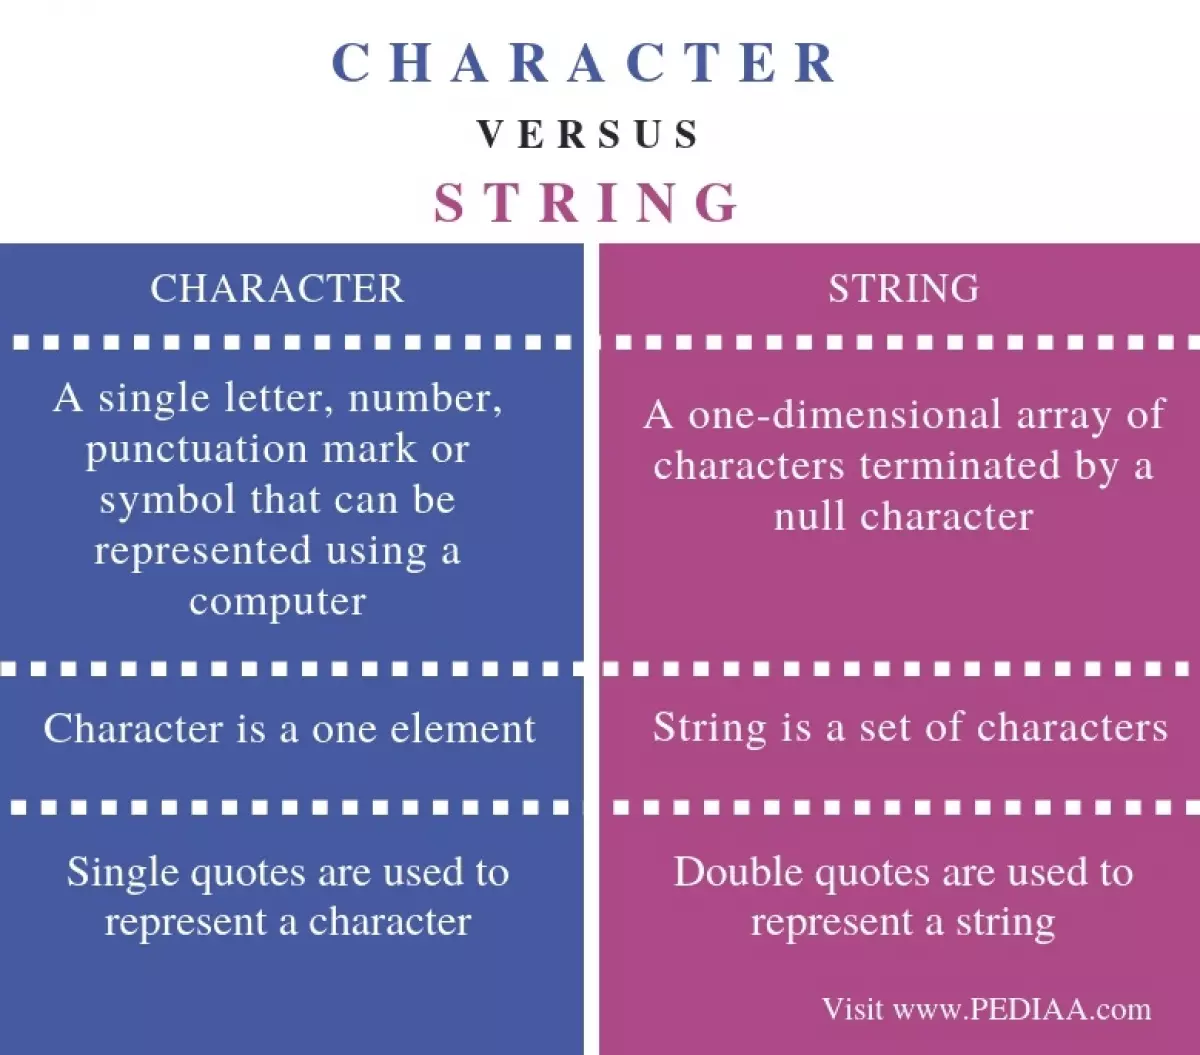 Difference Between Character and String - Comparison Summary